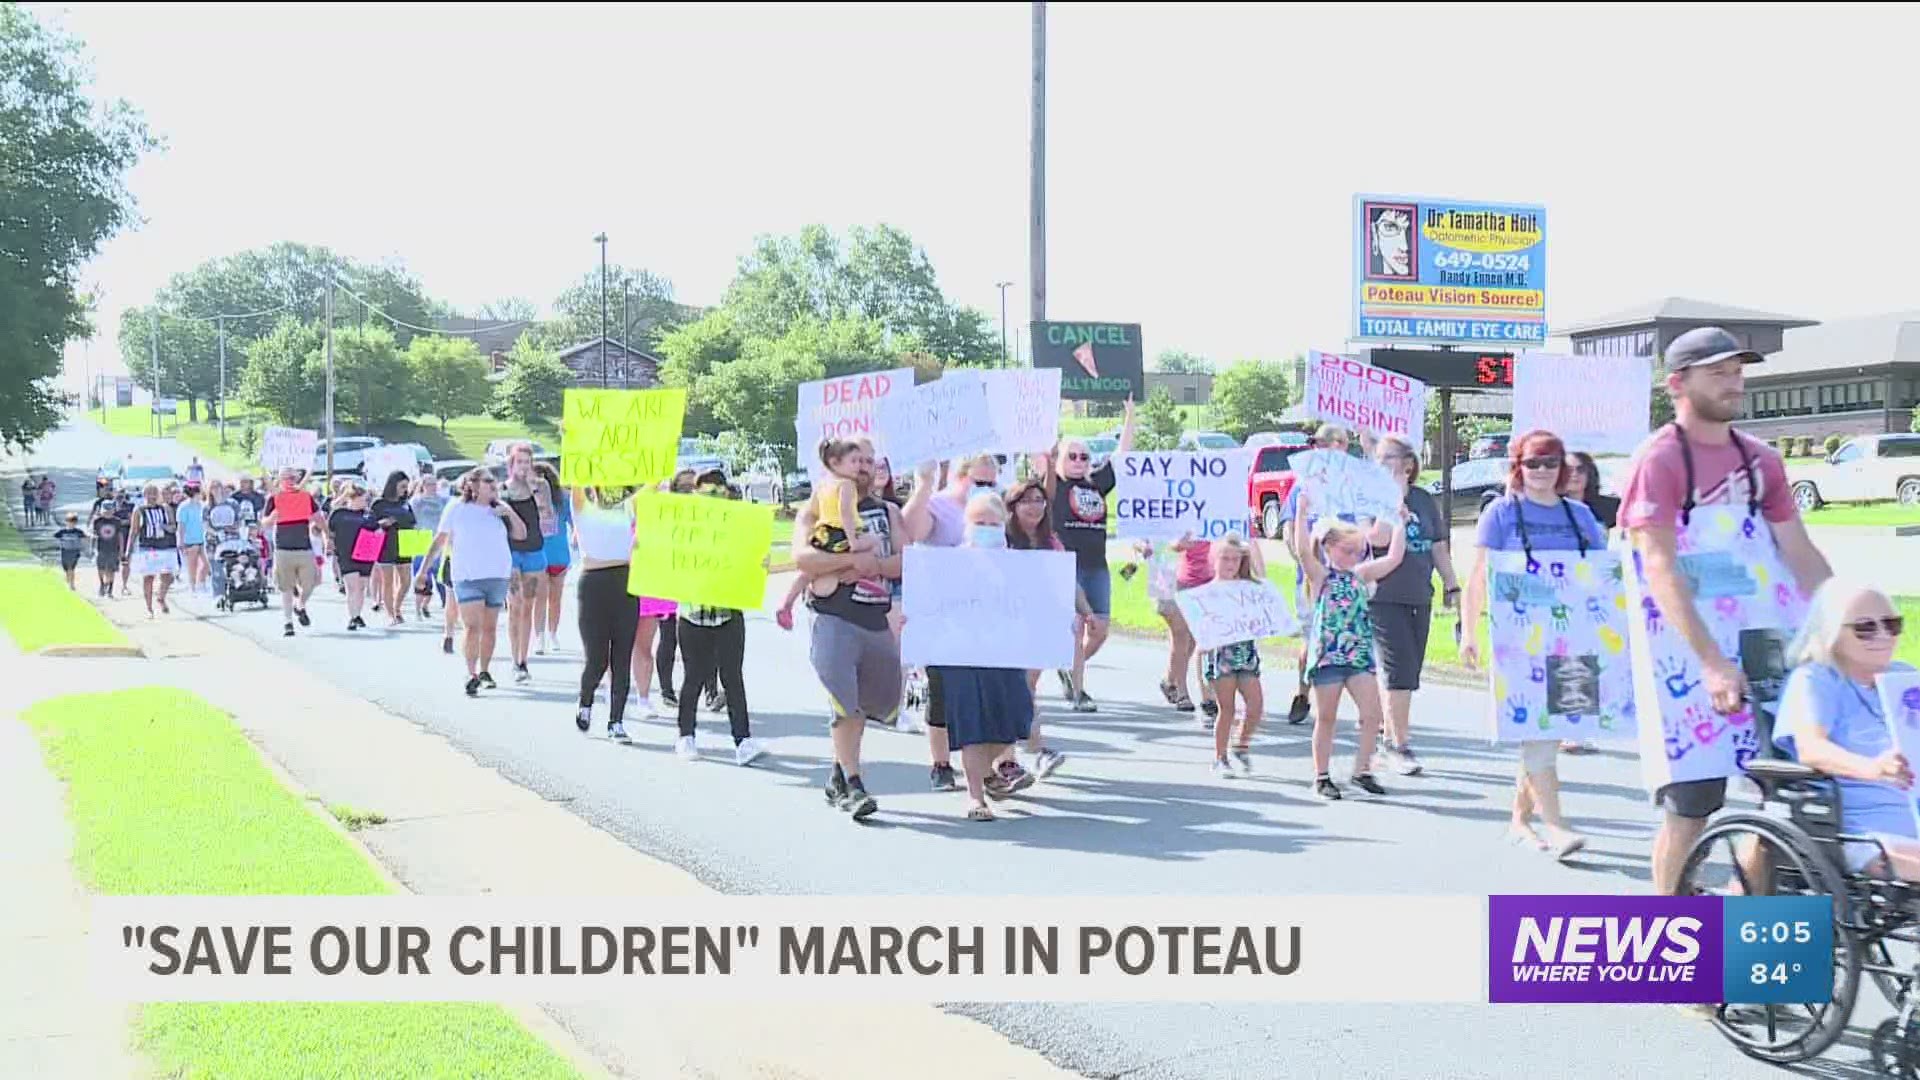 A march around the #saveourchildren movement was held in Poteau, Okla. on Saturday.